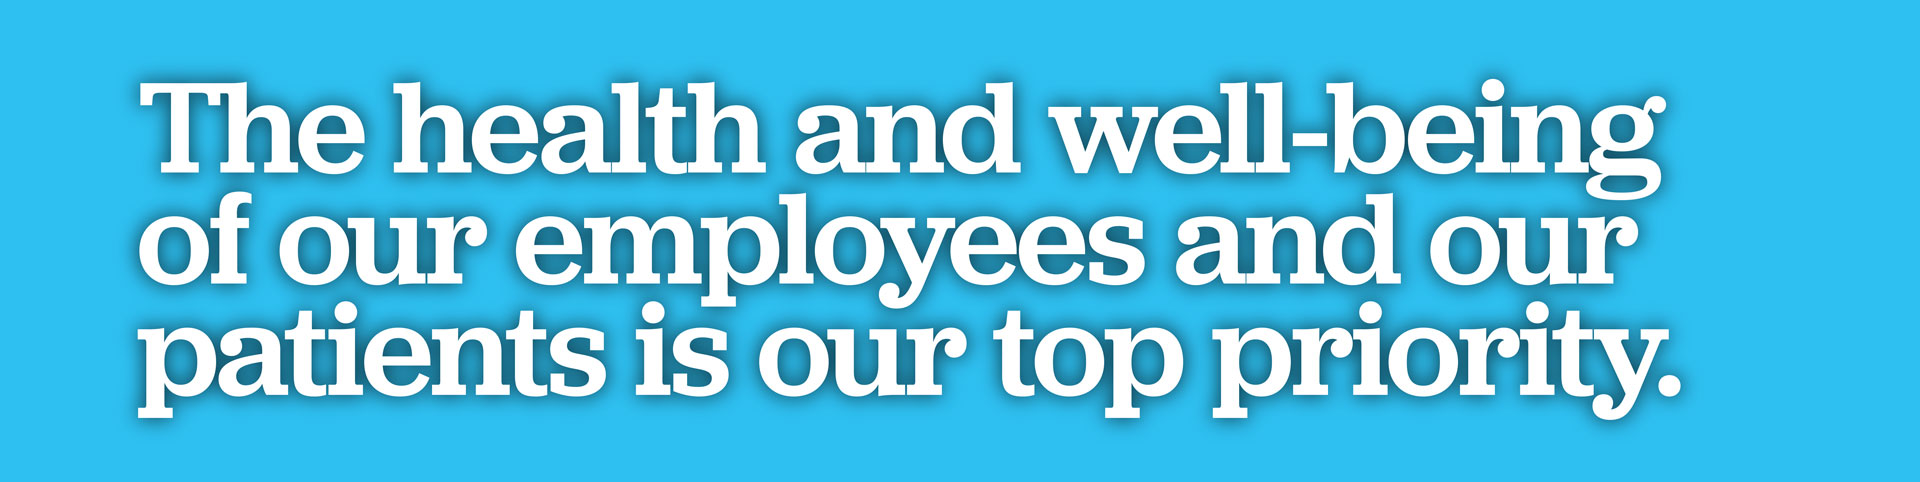 The health and well-being of our employees and our patients is our top priority